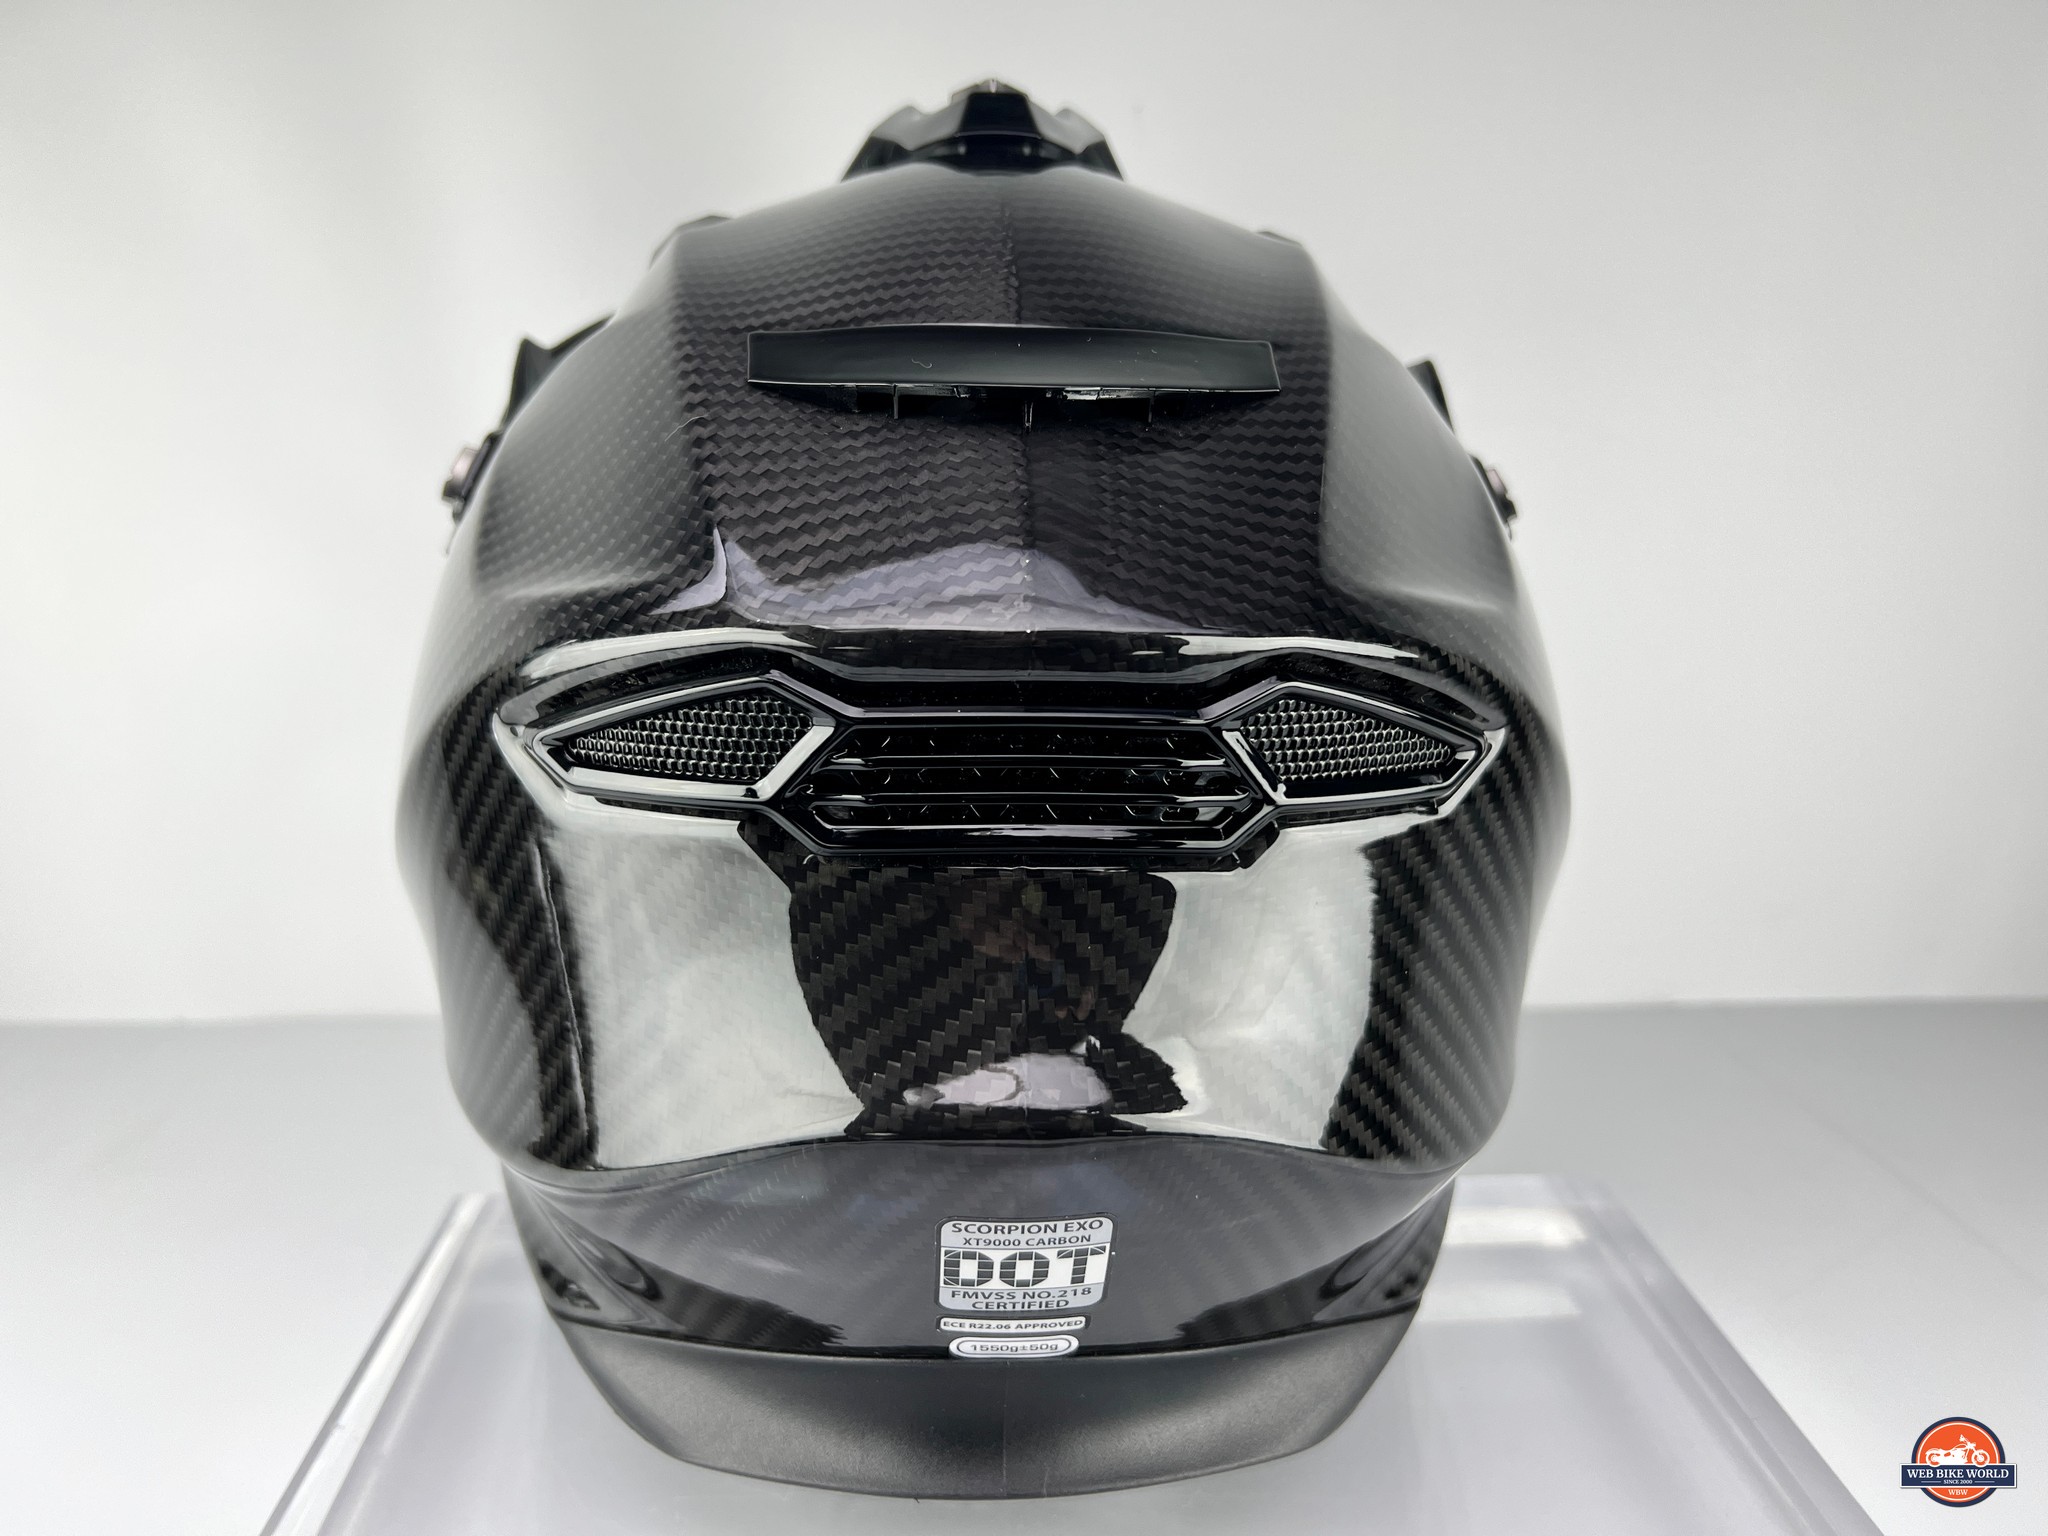 The back of the XT9000 features three exhaust ports